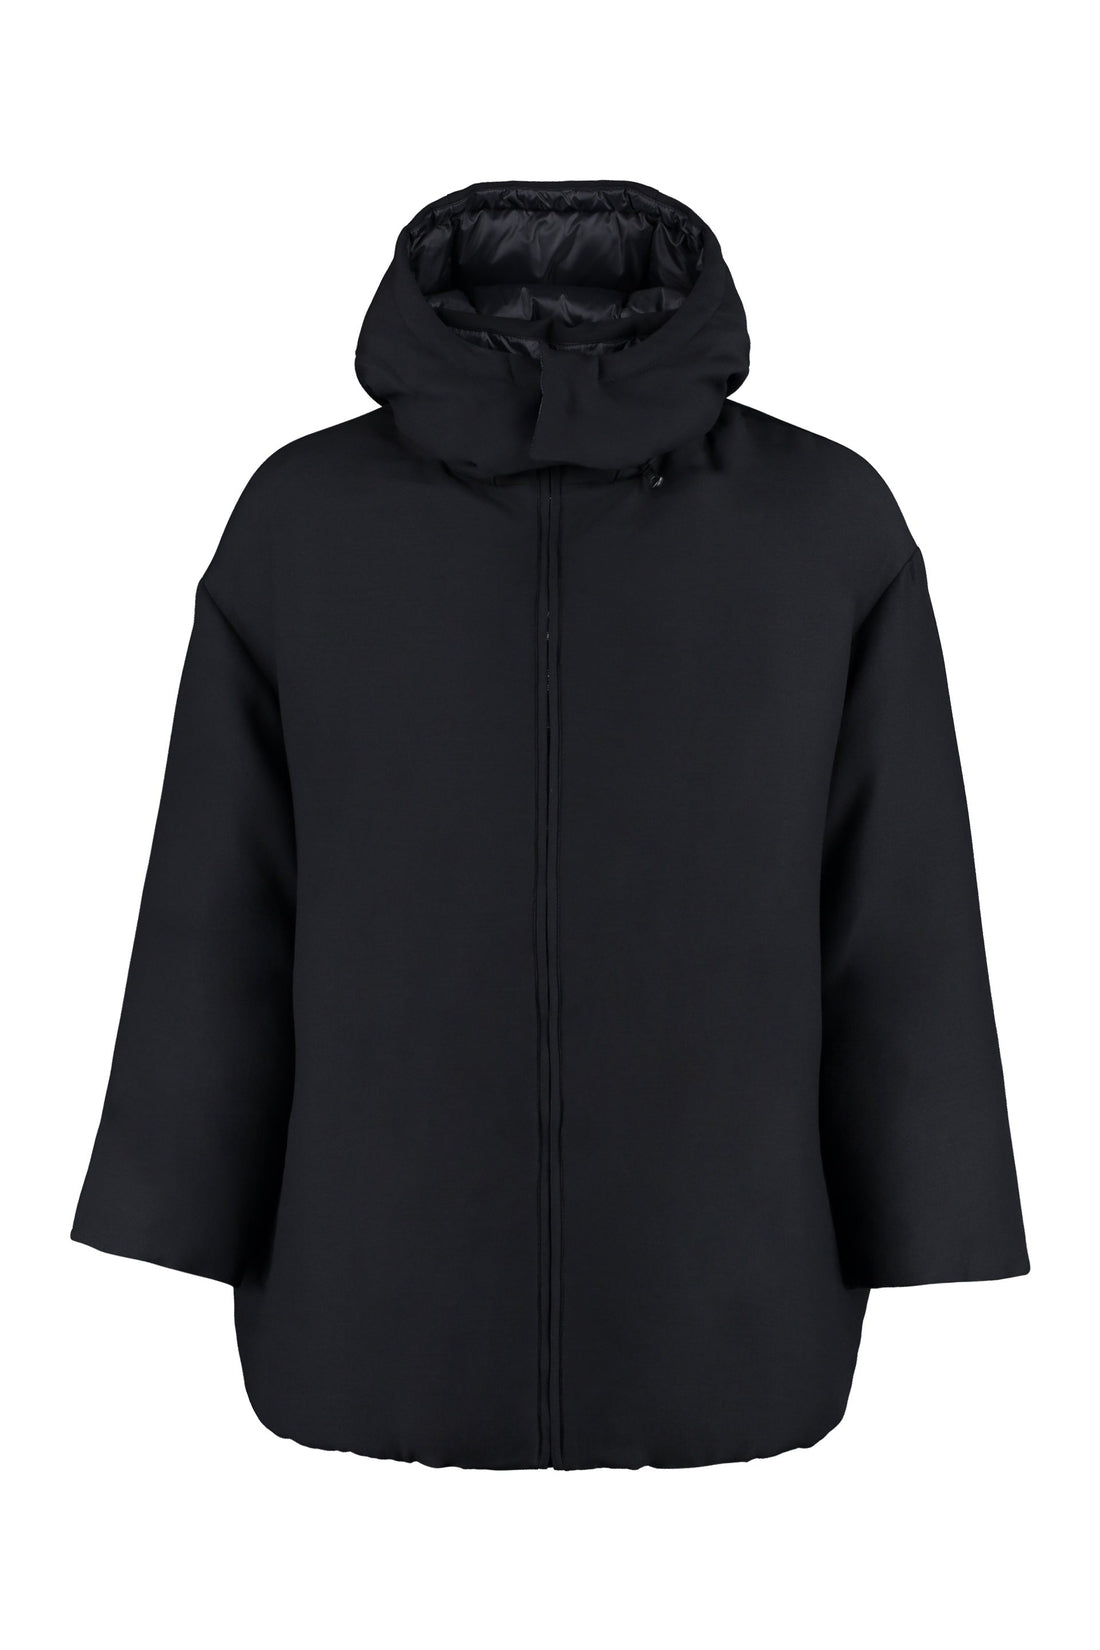 Valentino-OUTLET-SALE-Reversible hooded down jacket-ARCHIVIST